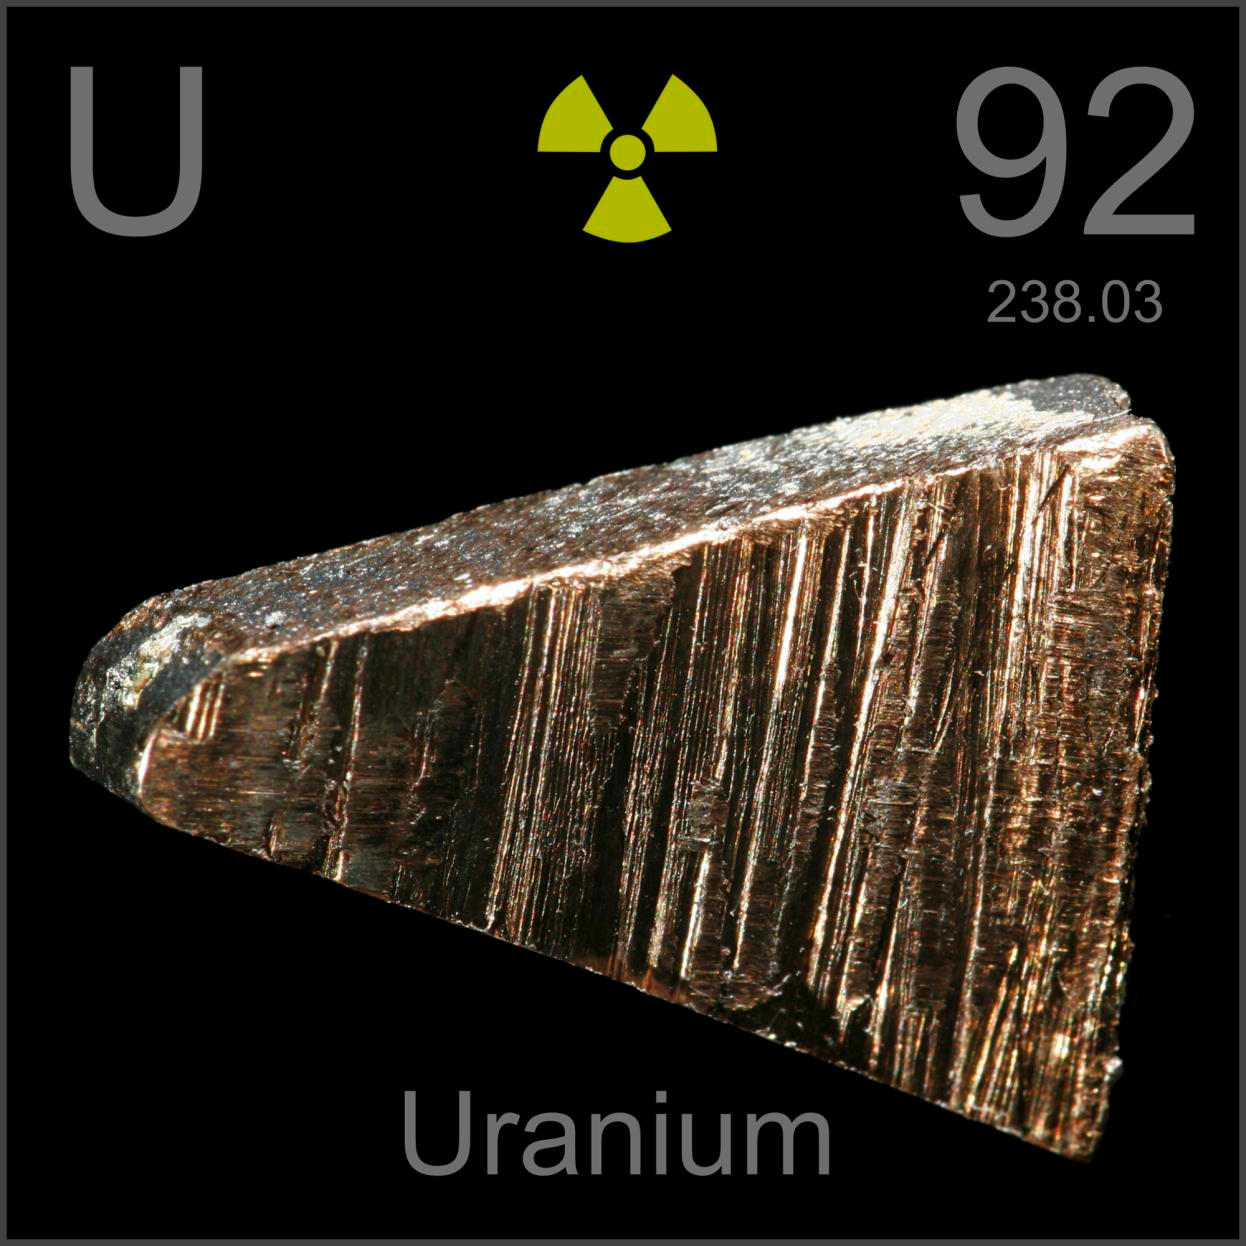 Facts Pictures Stories About The Element Uranium In The Periodic Table